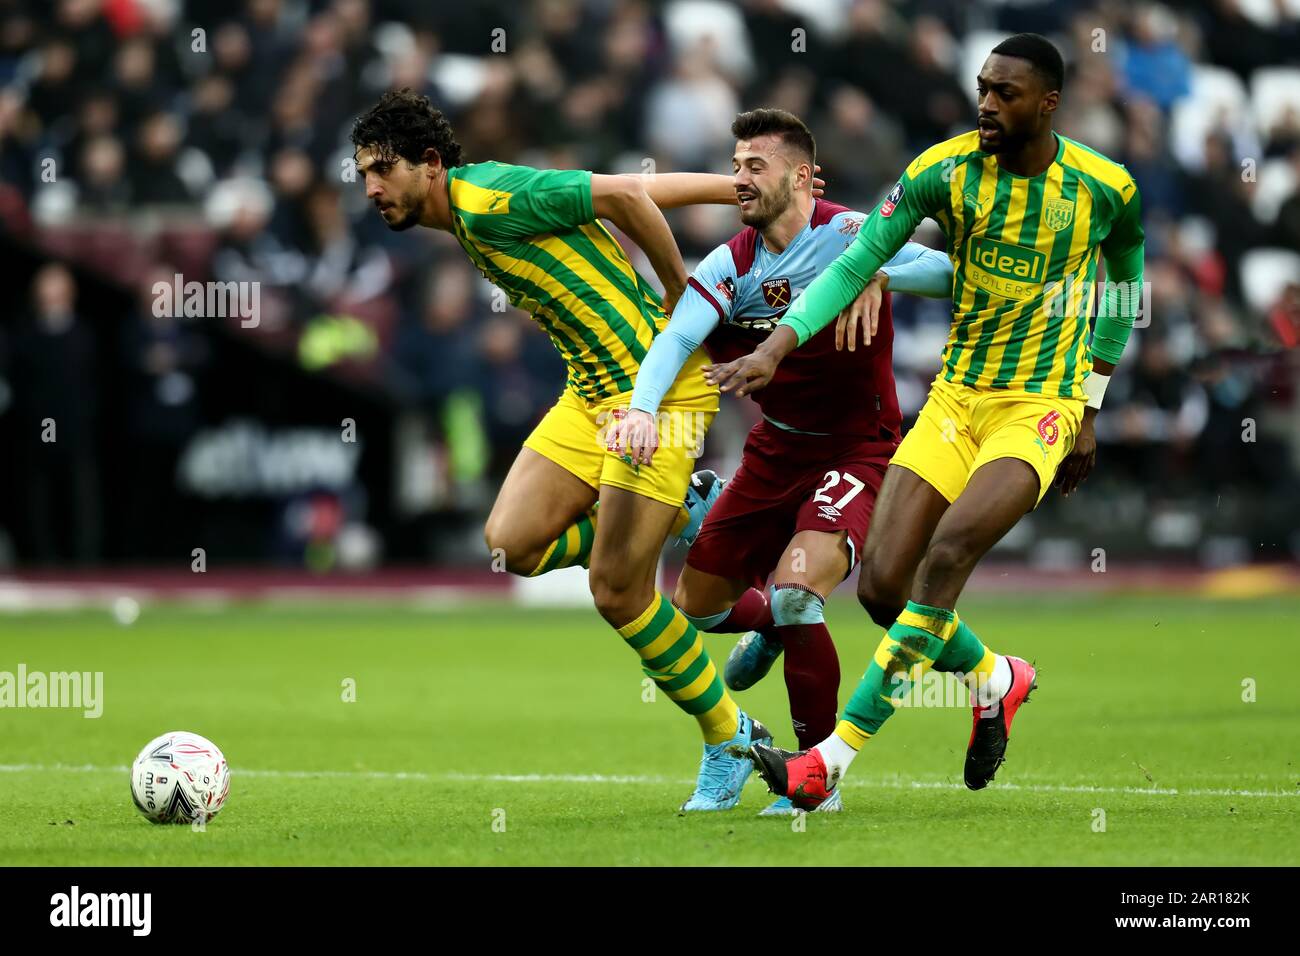 London Stadium, London, UK. 25th January 2020; London Stadium, London, England; English FA Cup Football, West Ham United versus West Bromwich Albion; Ahmed Hegazy and Semi Ajayi of West Bromwich Albion close down Albian Ajeti of West Ham United - Strictly Editorial Use Only. No use with unauthorized audio, video, data, fixture lists, club/league logos or 'live' services. Online in-match use limited to 120 images, no video emulation. No use in betting, games or single club/league/player publications Stock Photo